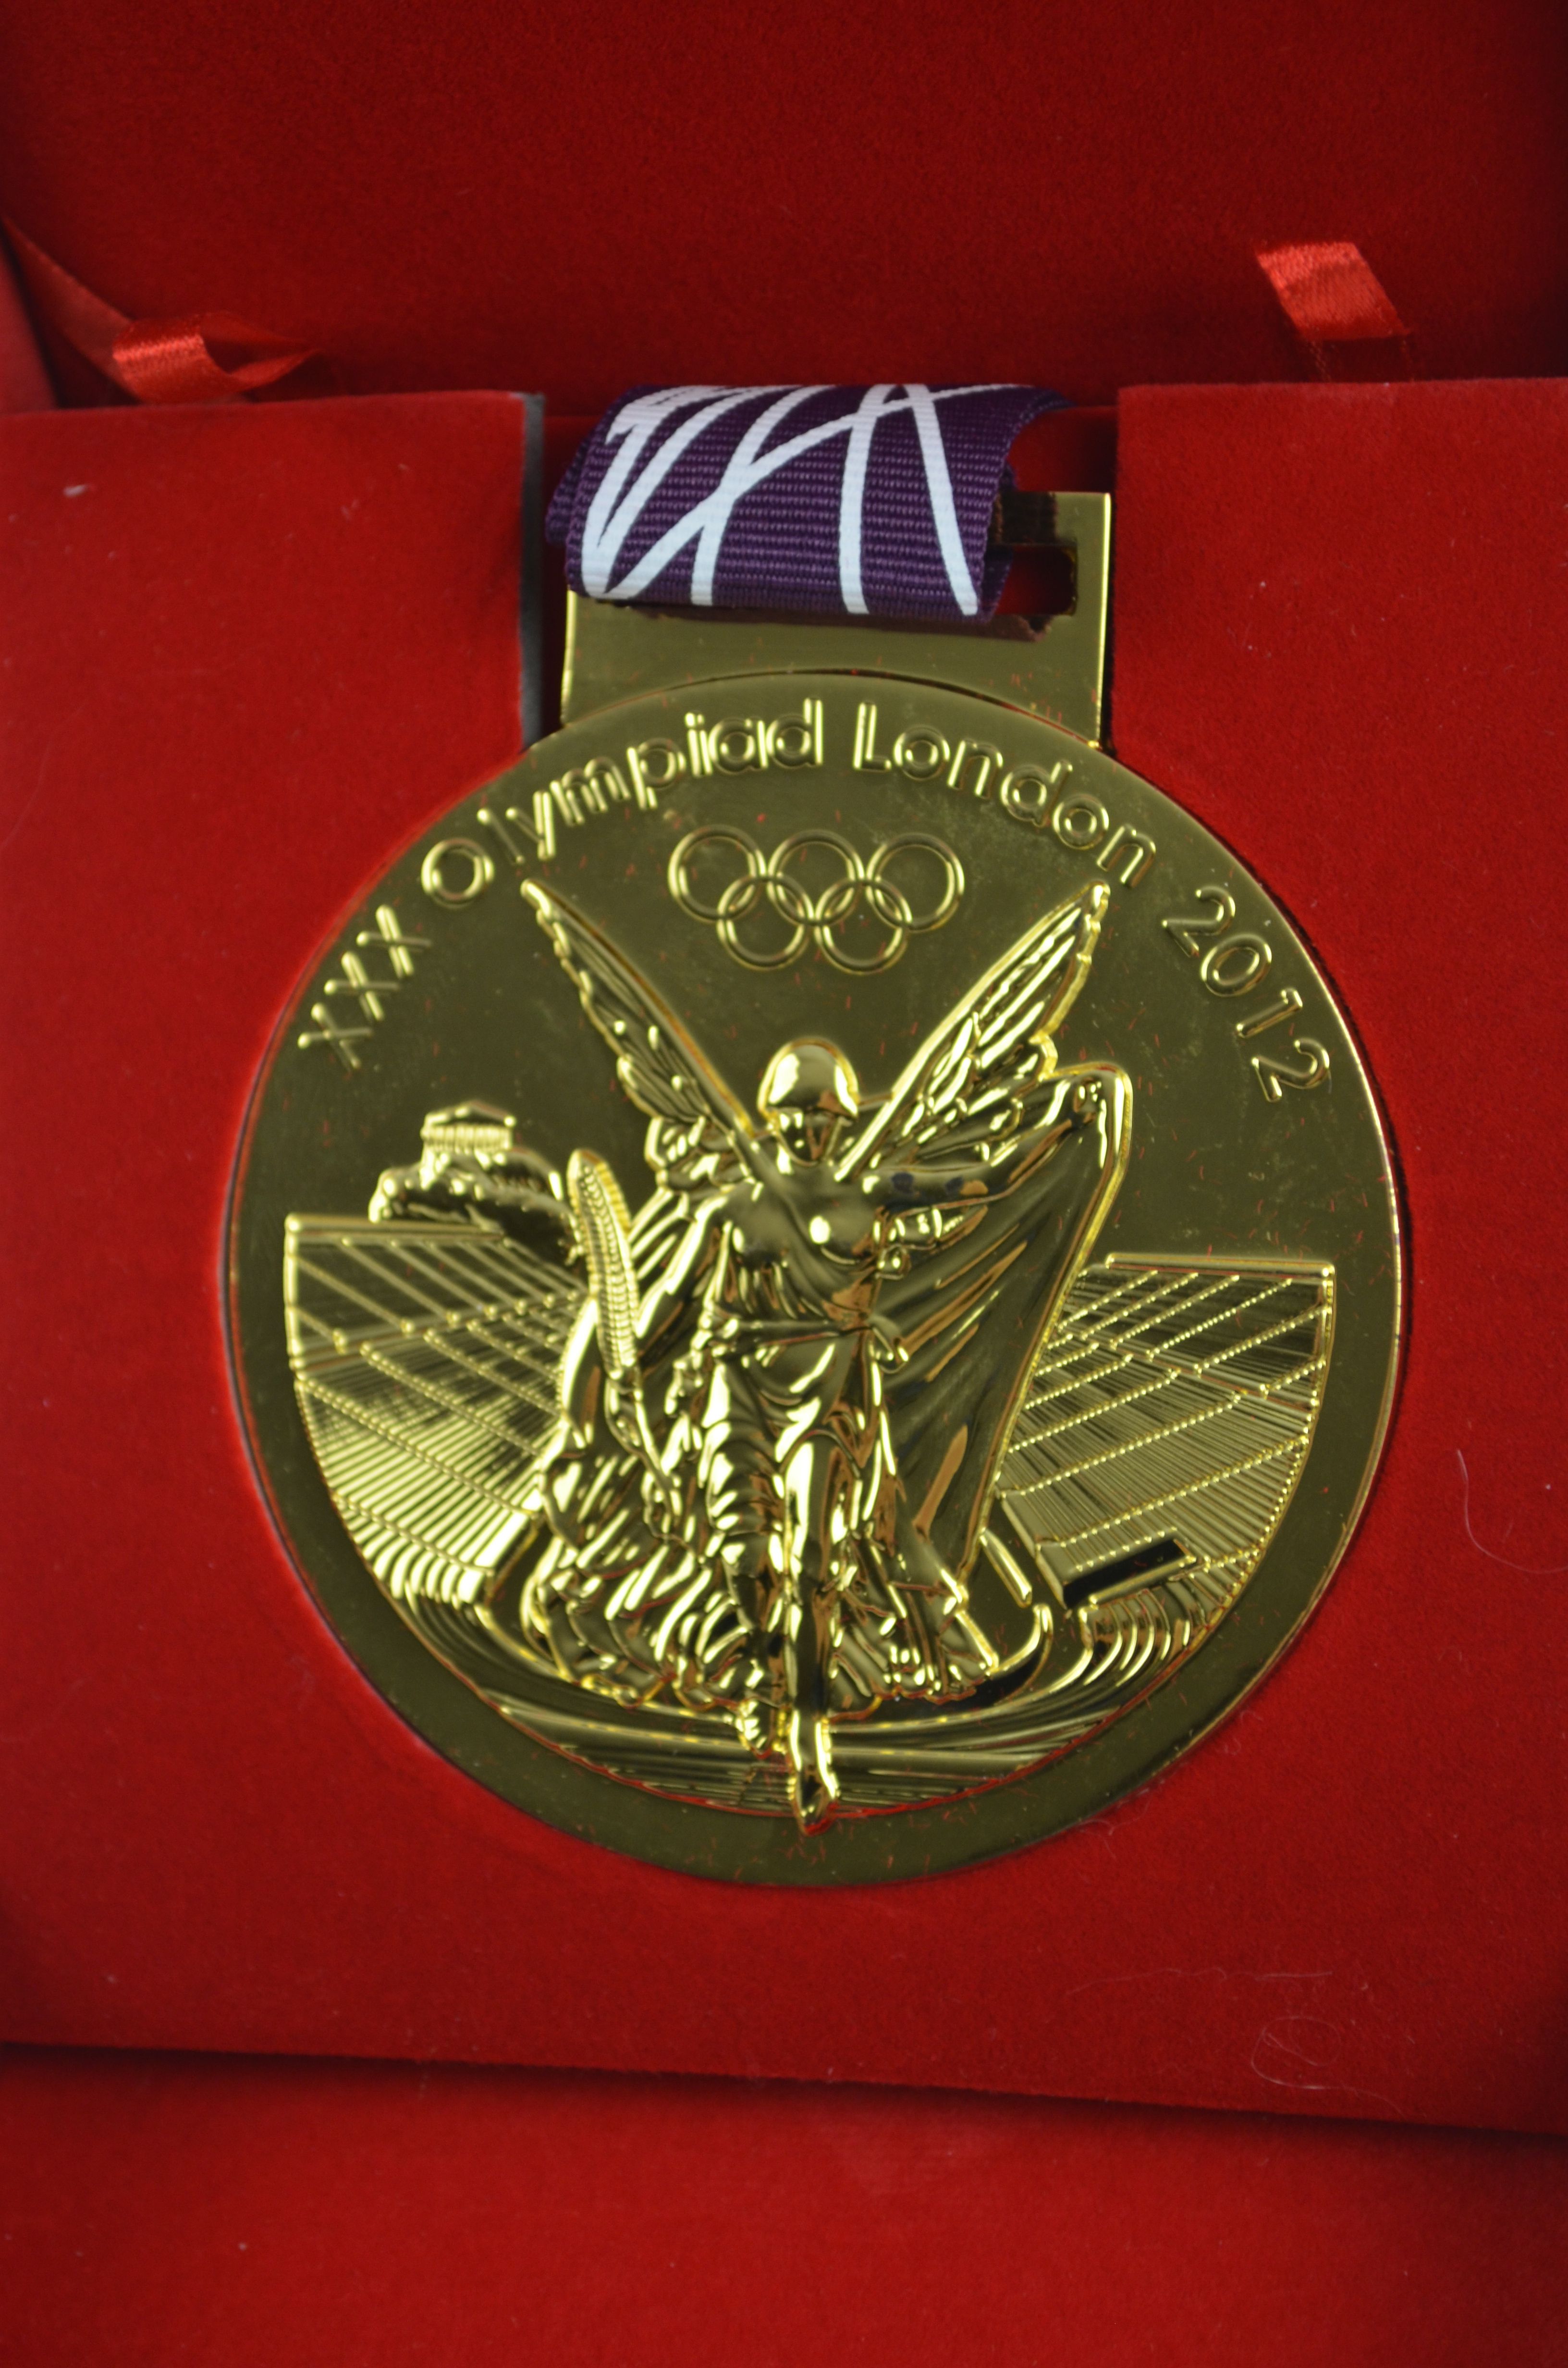 Instacode crack 2008 olympic medals